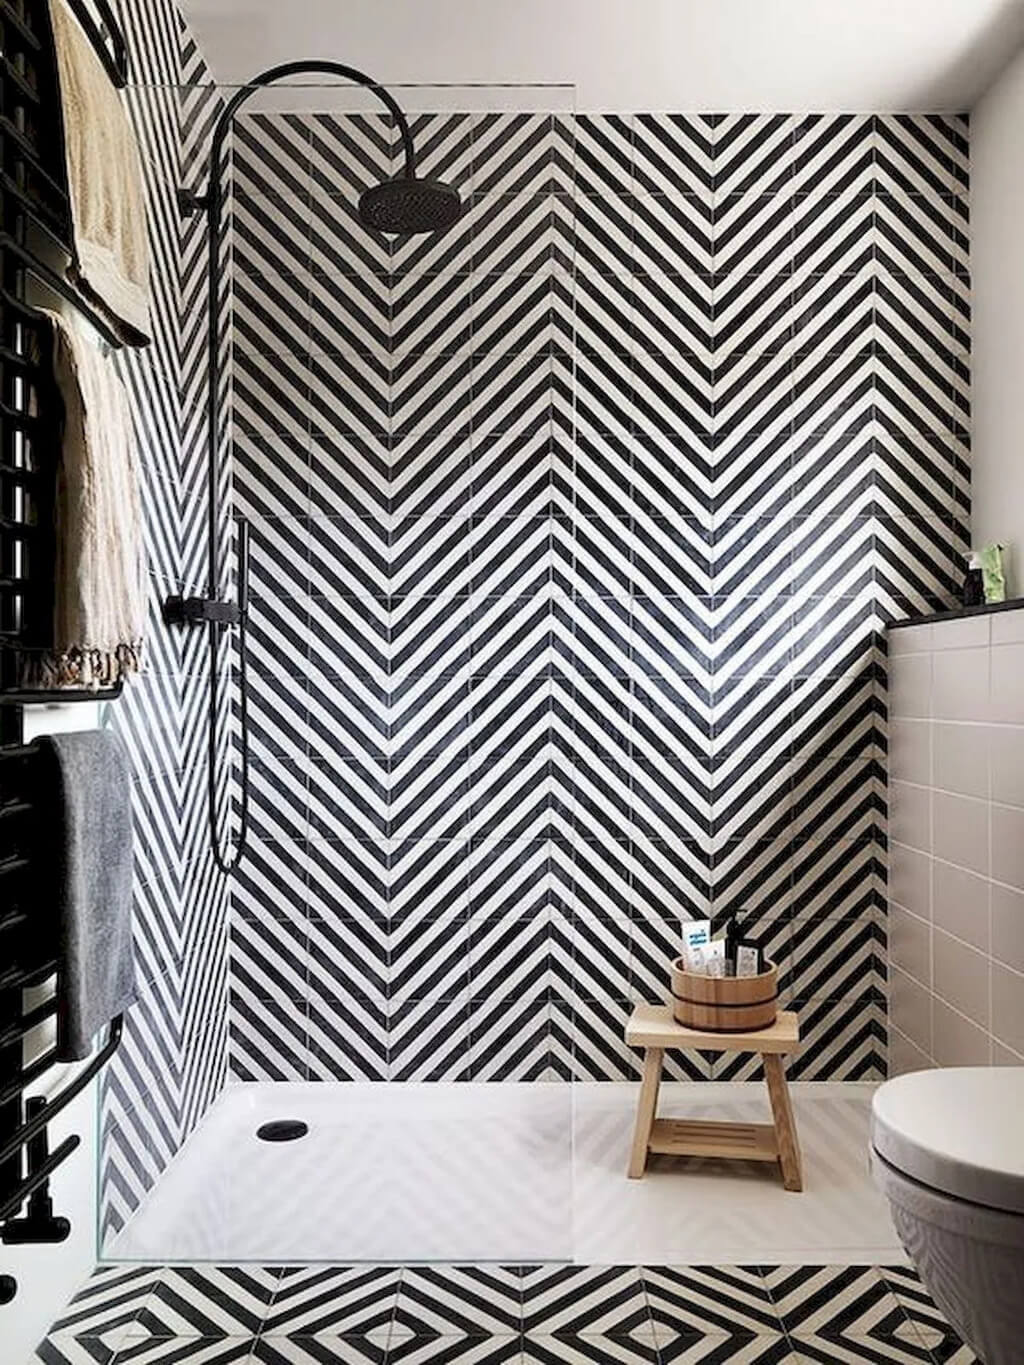 Create Interest with Chic and Dramatic Chevron Tiles